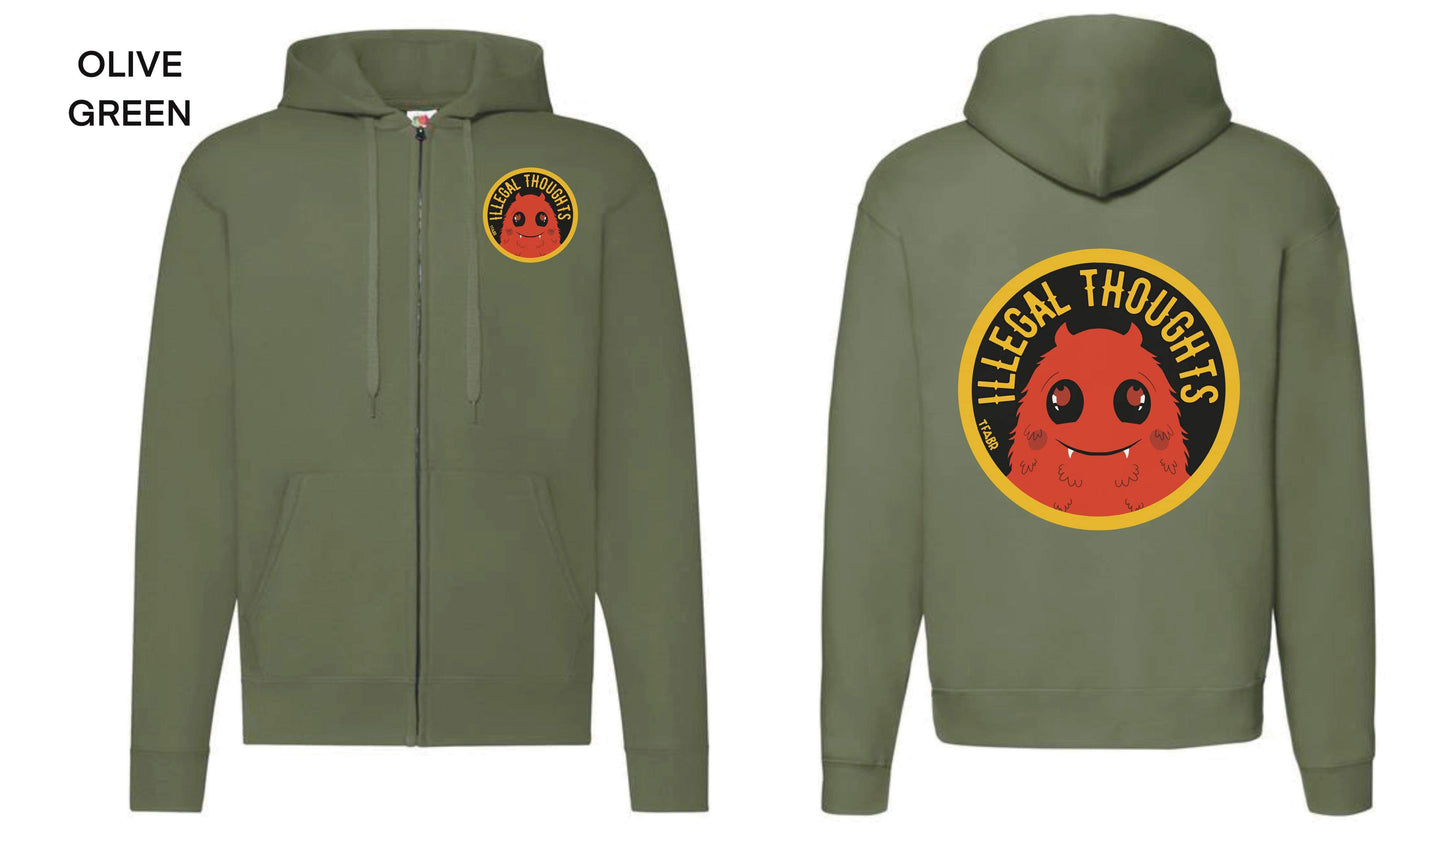 Illegal Thoughts Hoodies (Front & Back)